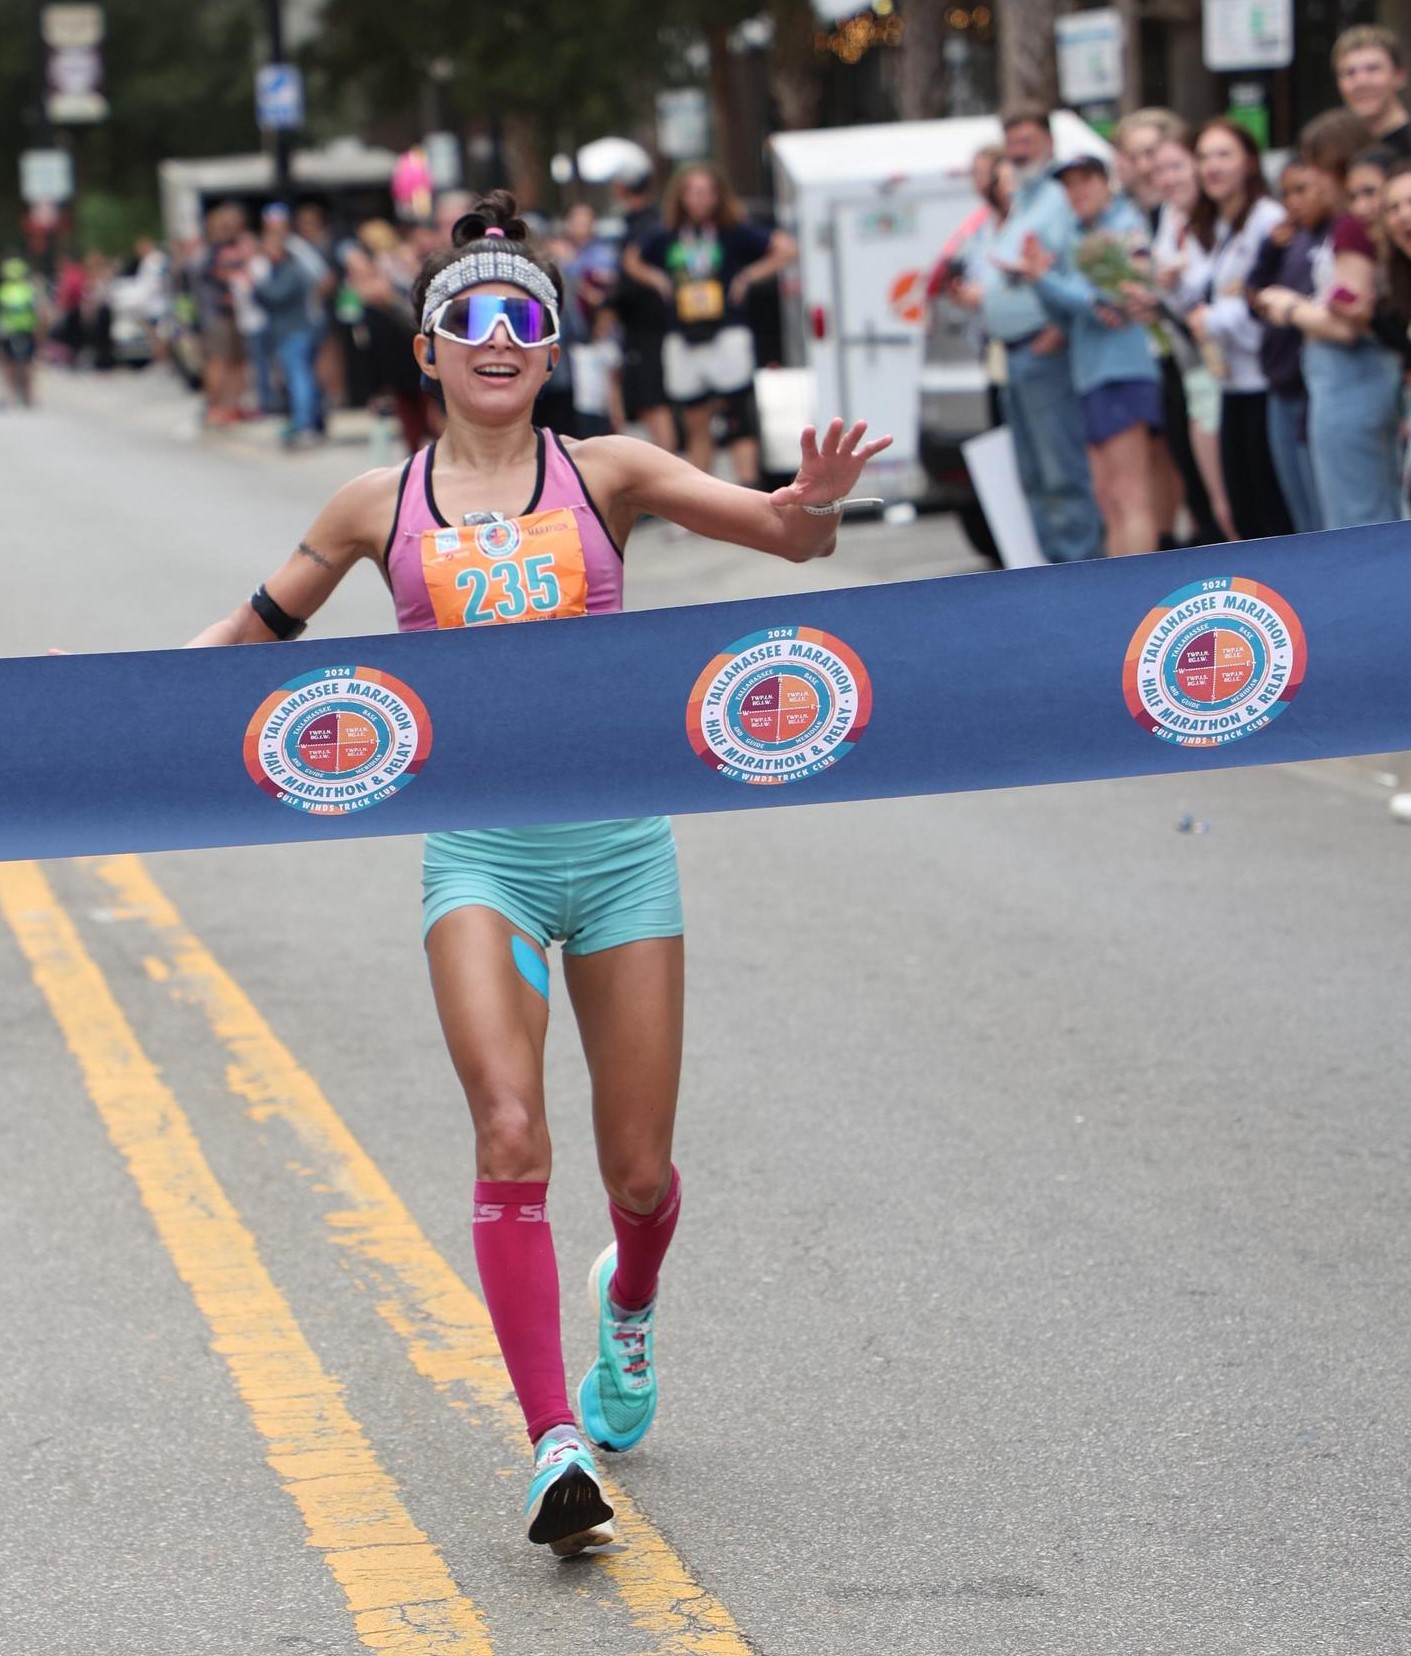 Gabbi Suver is a contender for the Texas Iron Man